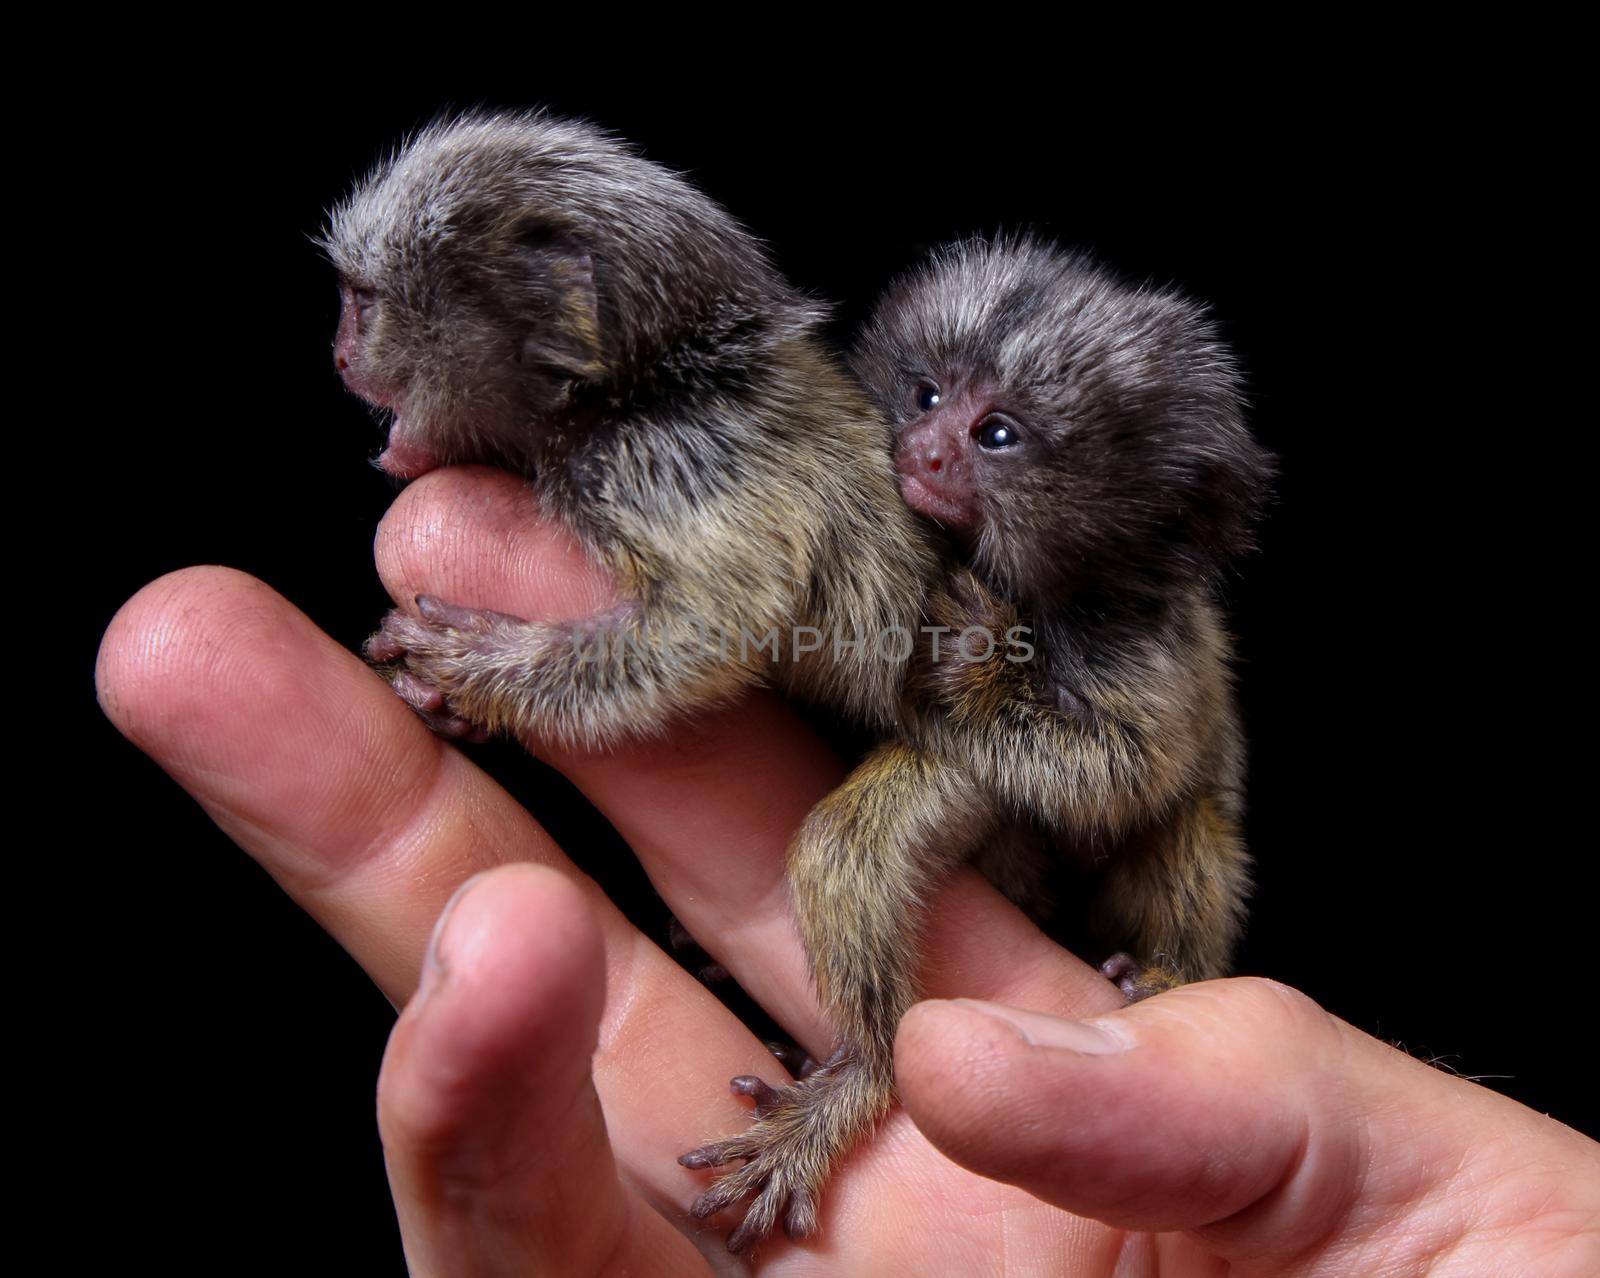 The new born common marmosets, Callithrix jacchus, 2 days old, isolated on black background